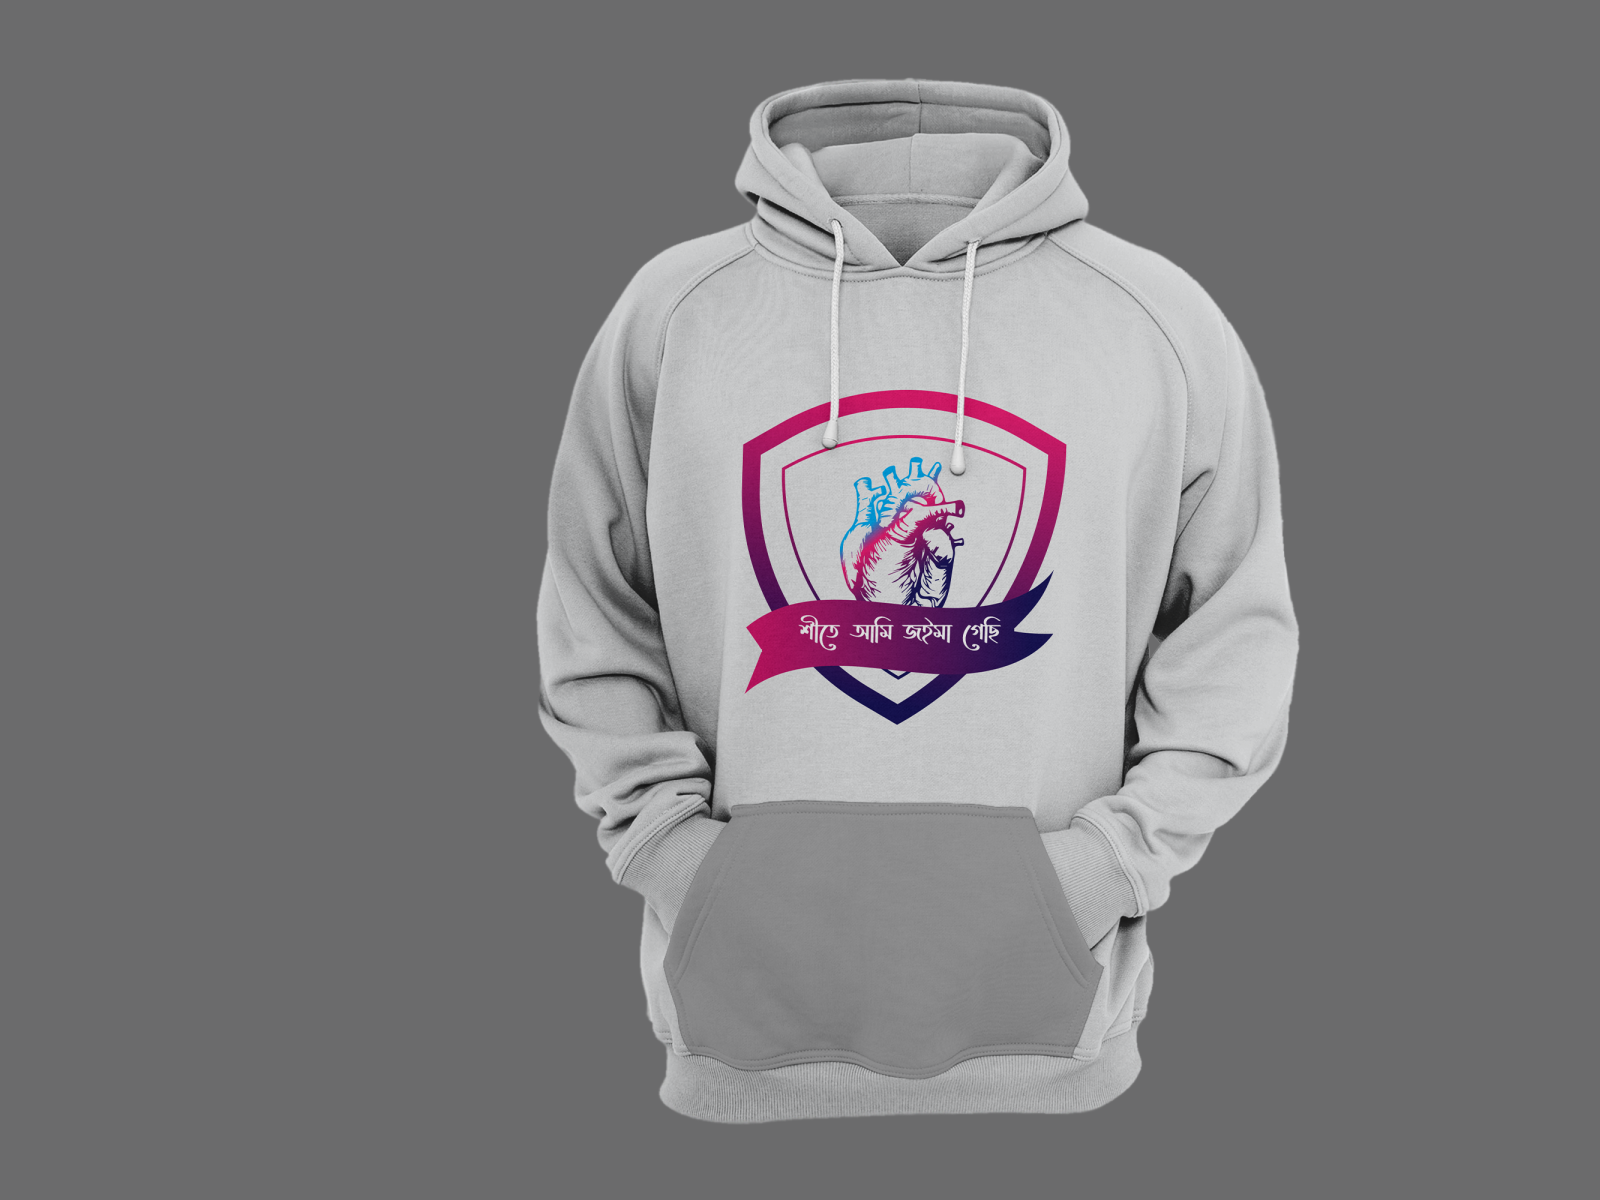  Hoodie  Design  by Md Mamun on Dribbble